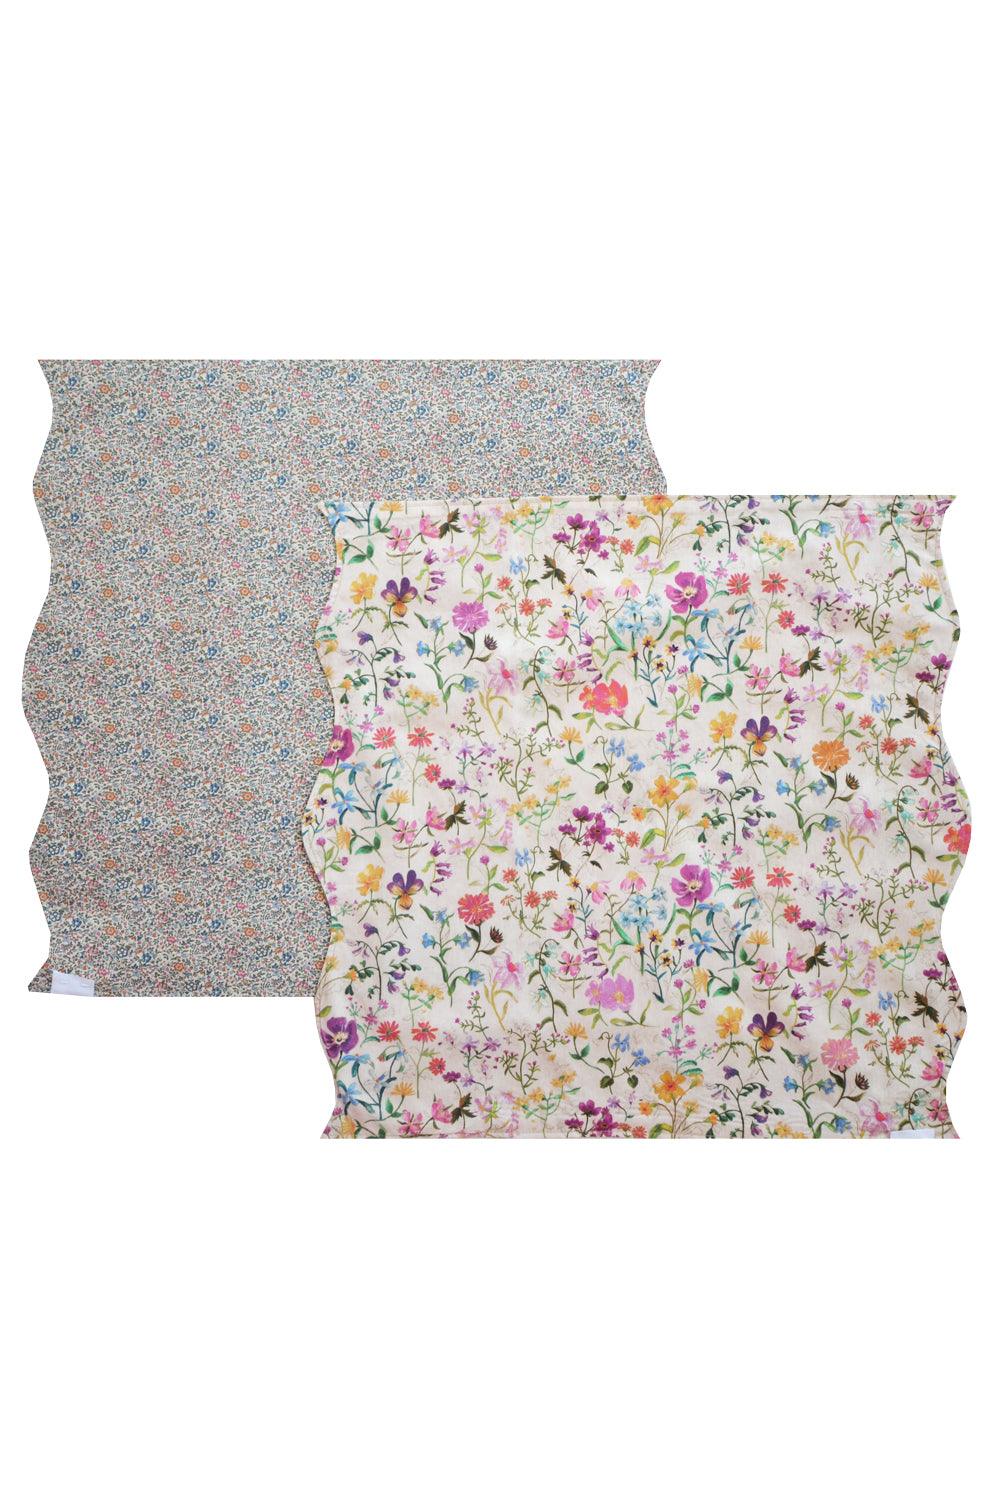 Reversible Wavy Napkin Set made with Liberty Fabric LINEN GARDEN - Coco & Wolf